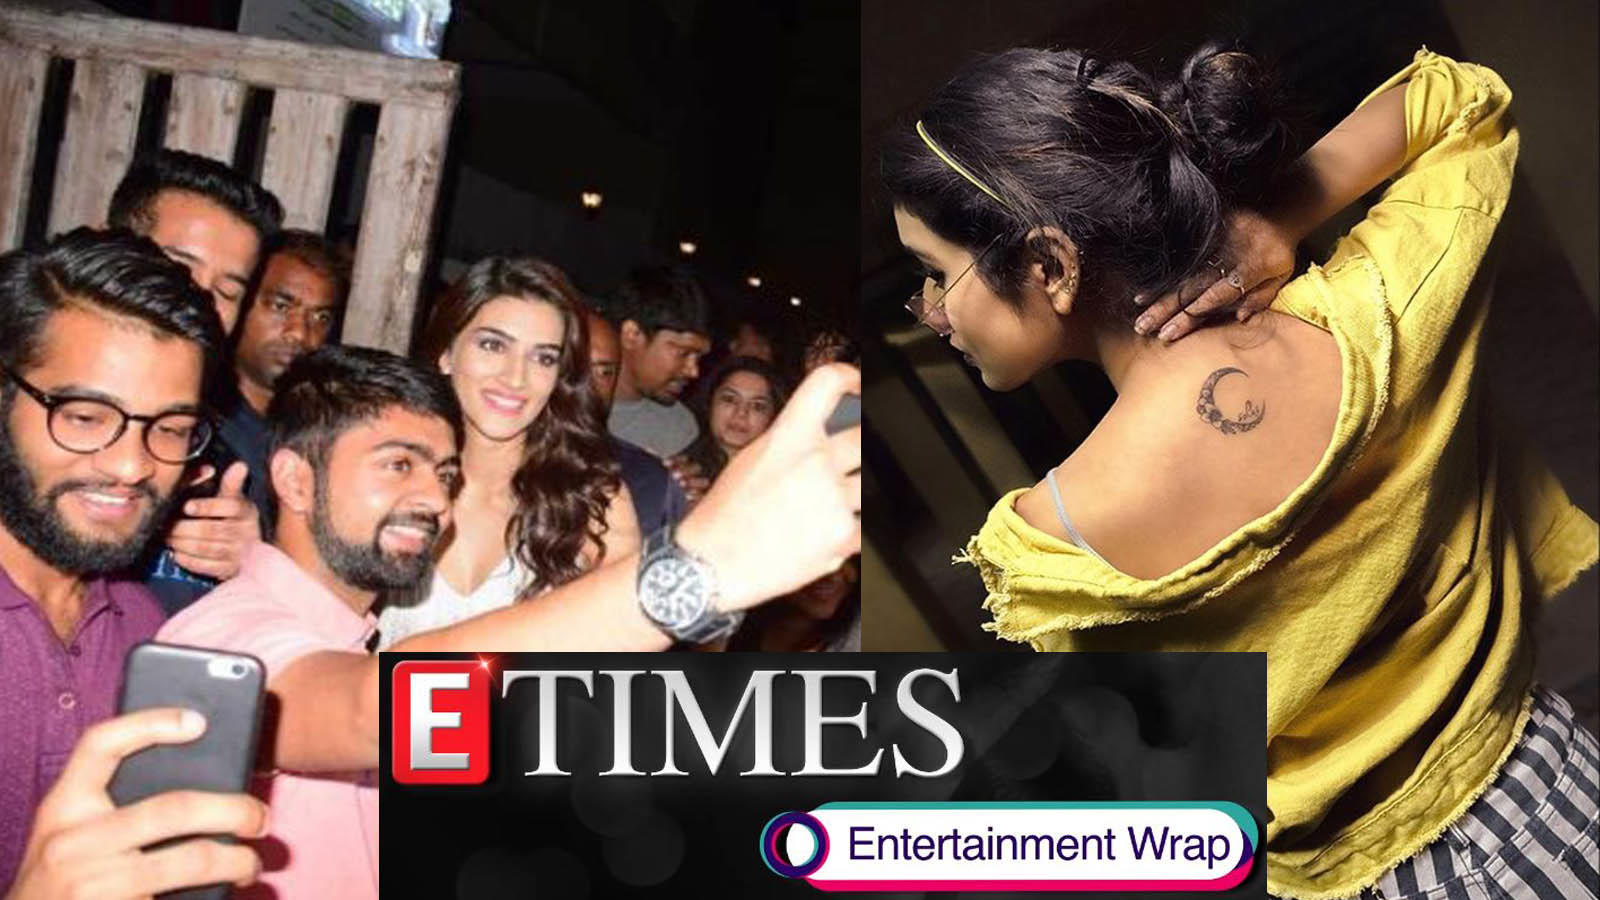 Kriti Sanons fan gets her name inked on his arm